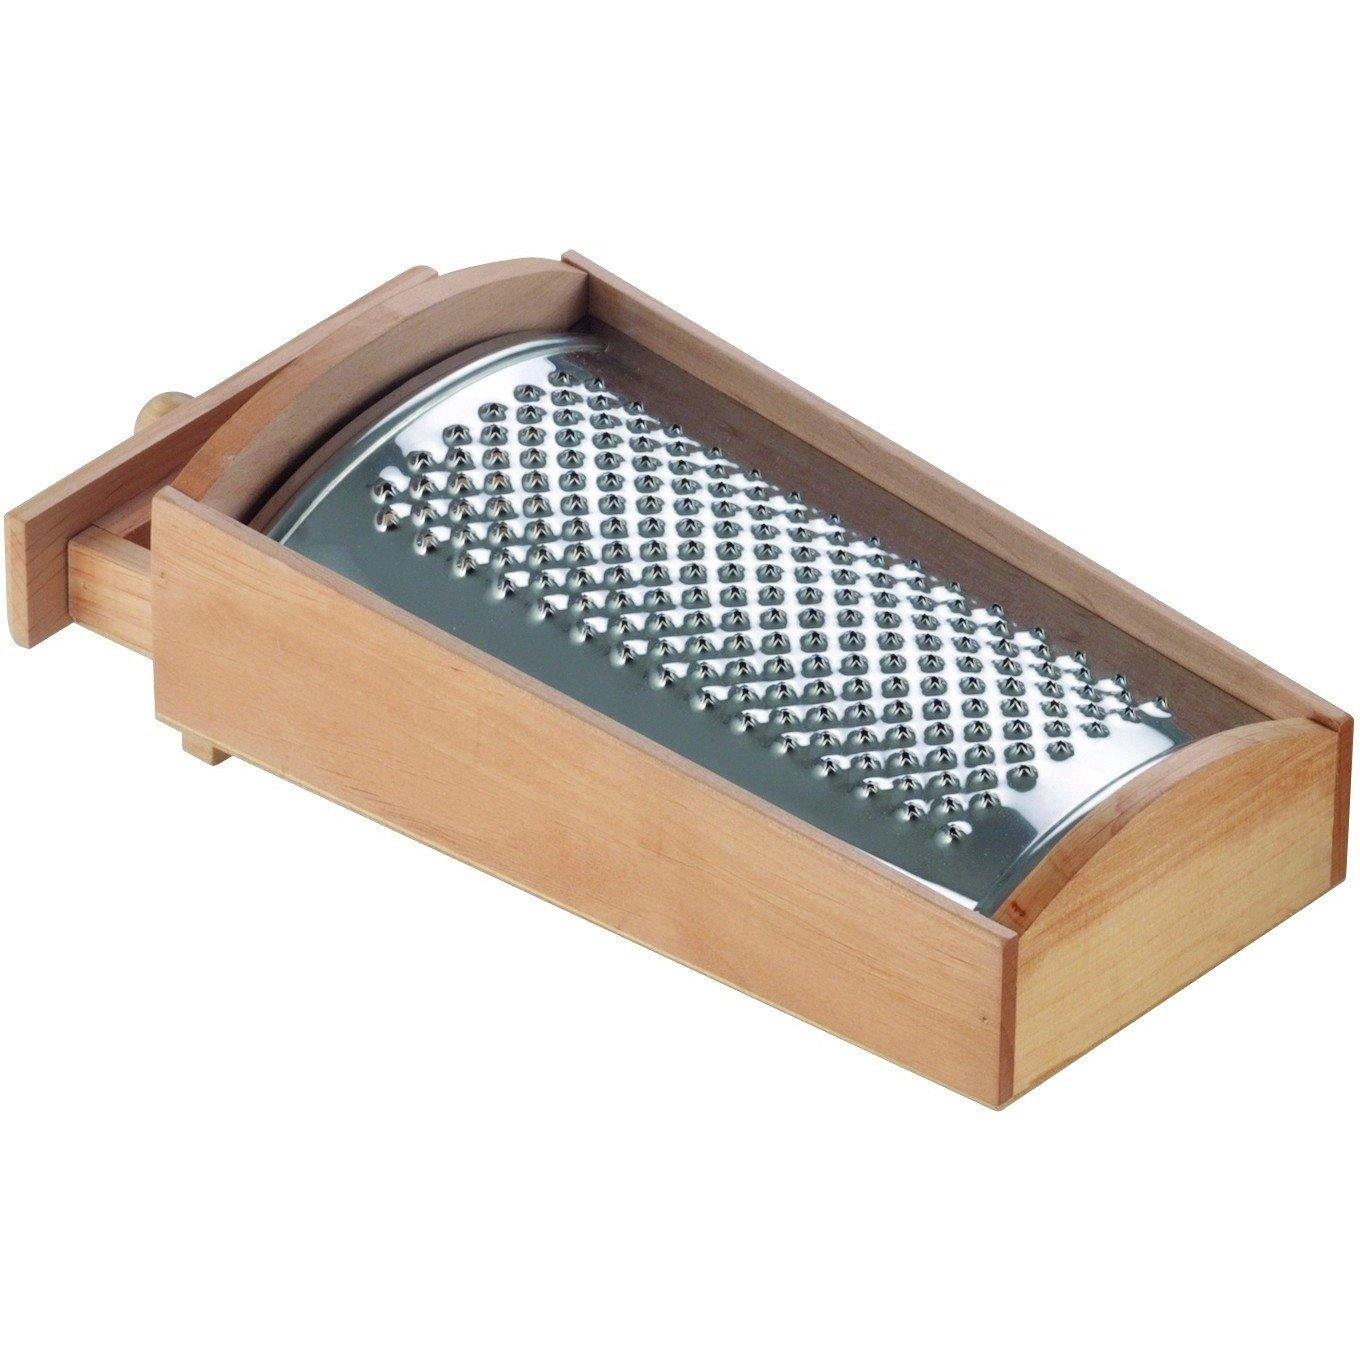 Wooden Cheese Grater Box With Drawer - Pasta Kitchen (tutto pasta)